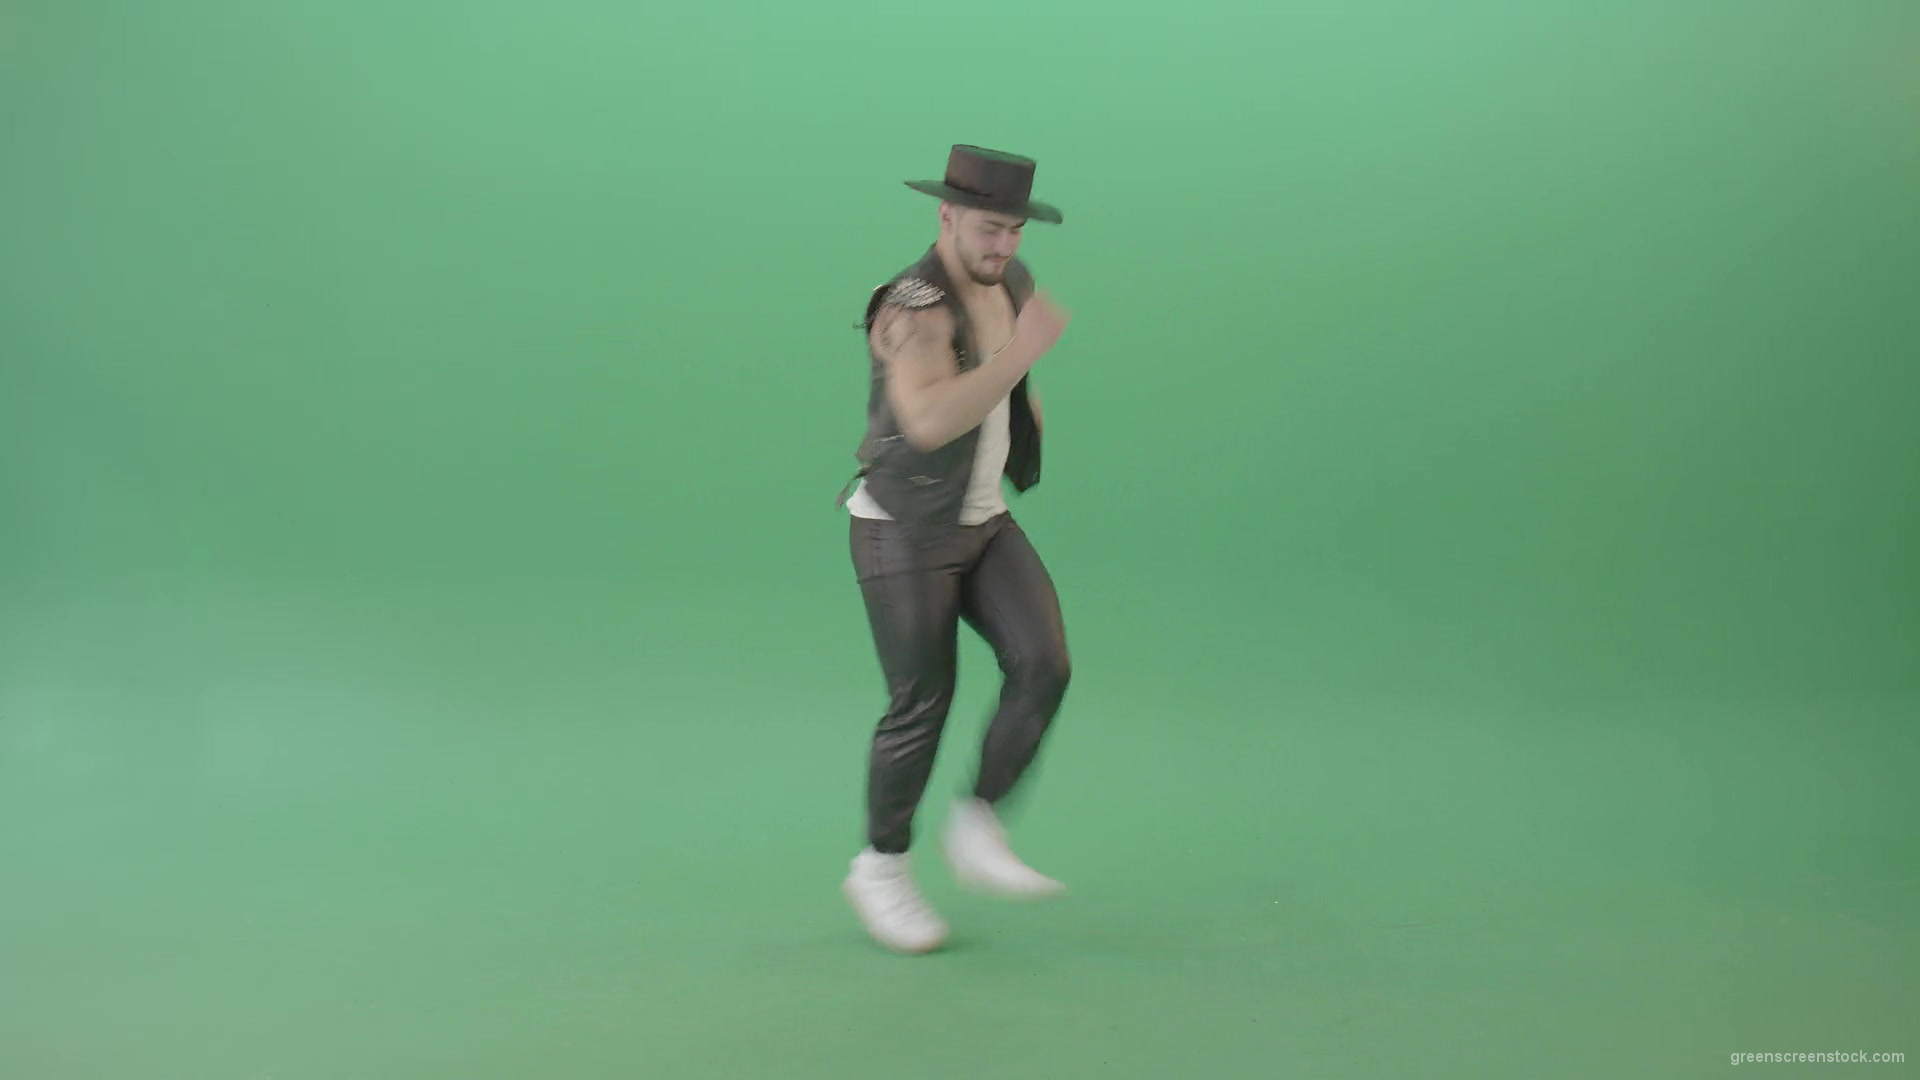 American-Man-with-beard-and-in-black-hat-dancing-Shuffle-isolated-on-Chroma-key-green-screen-4K-Video-Footage-1920_004 Green Screen Stock